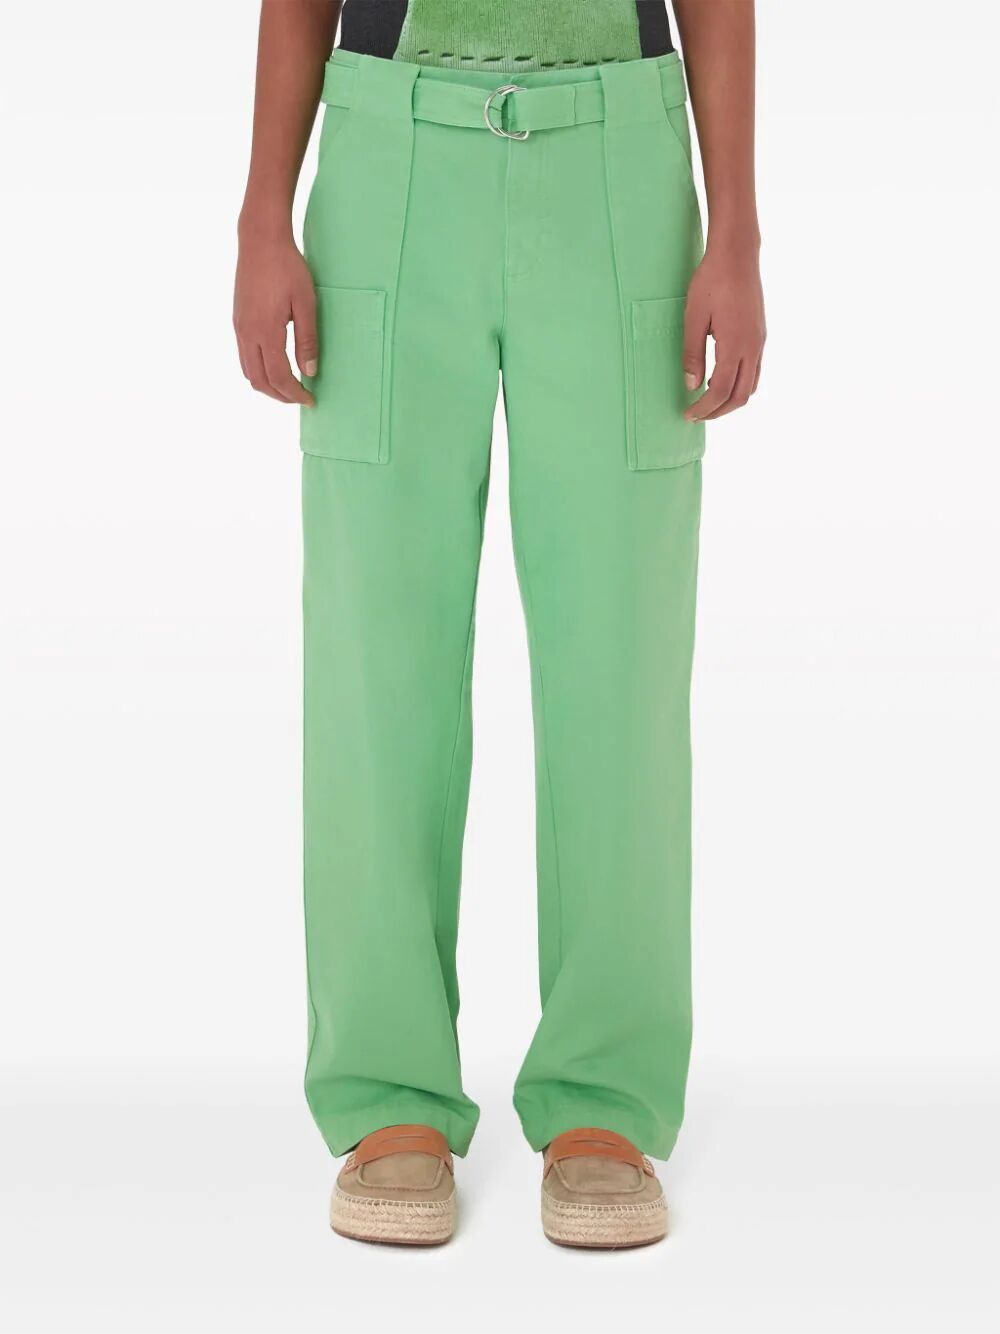 JW ANDERSON-GARMENT DYED CARGO TROUSERS-TR0357 PG1476 524